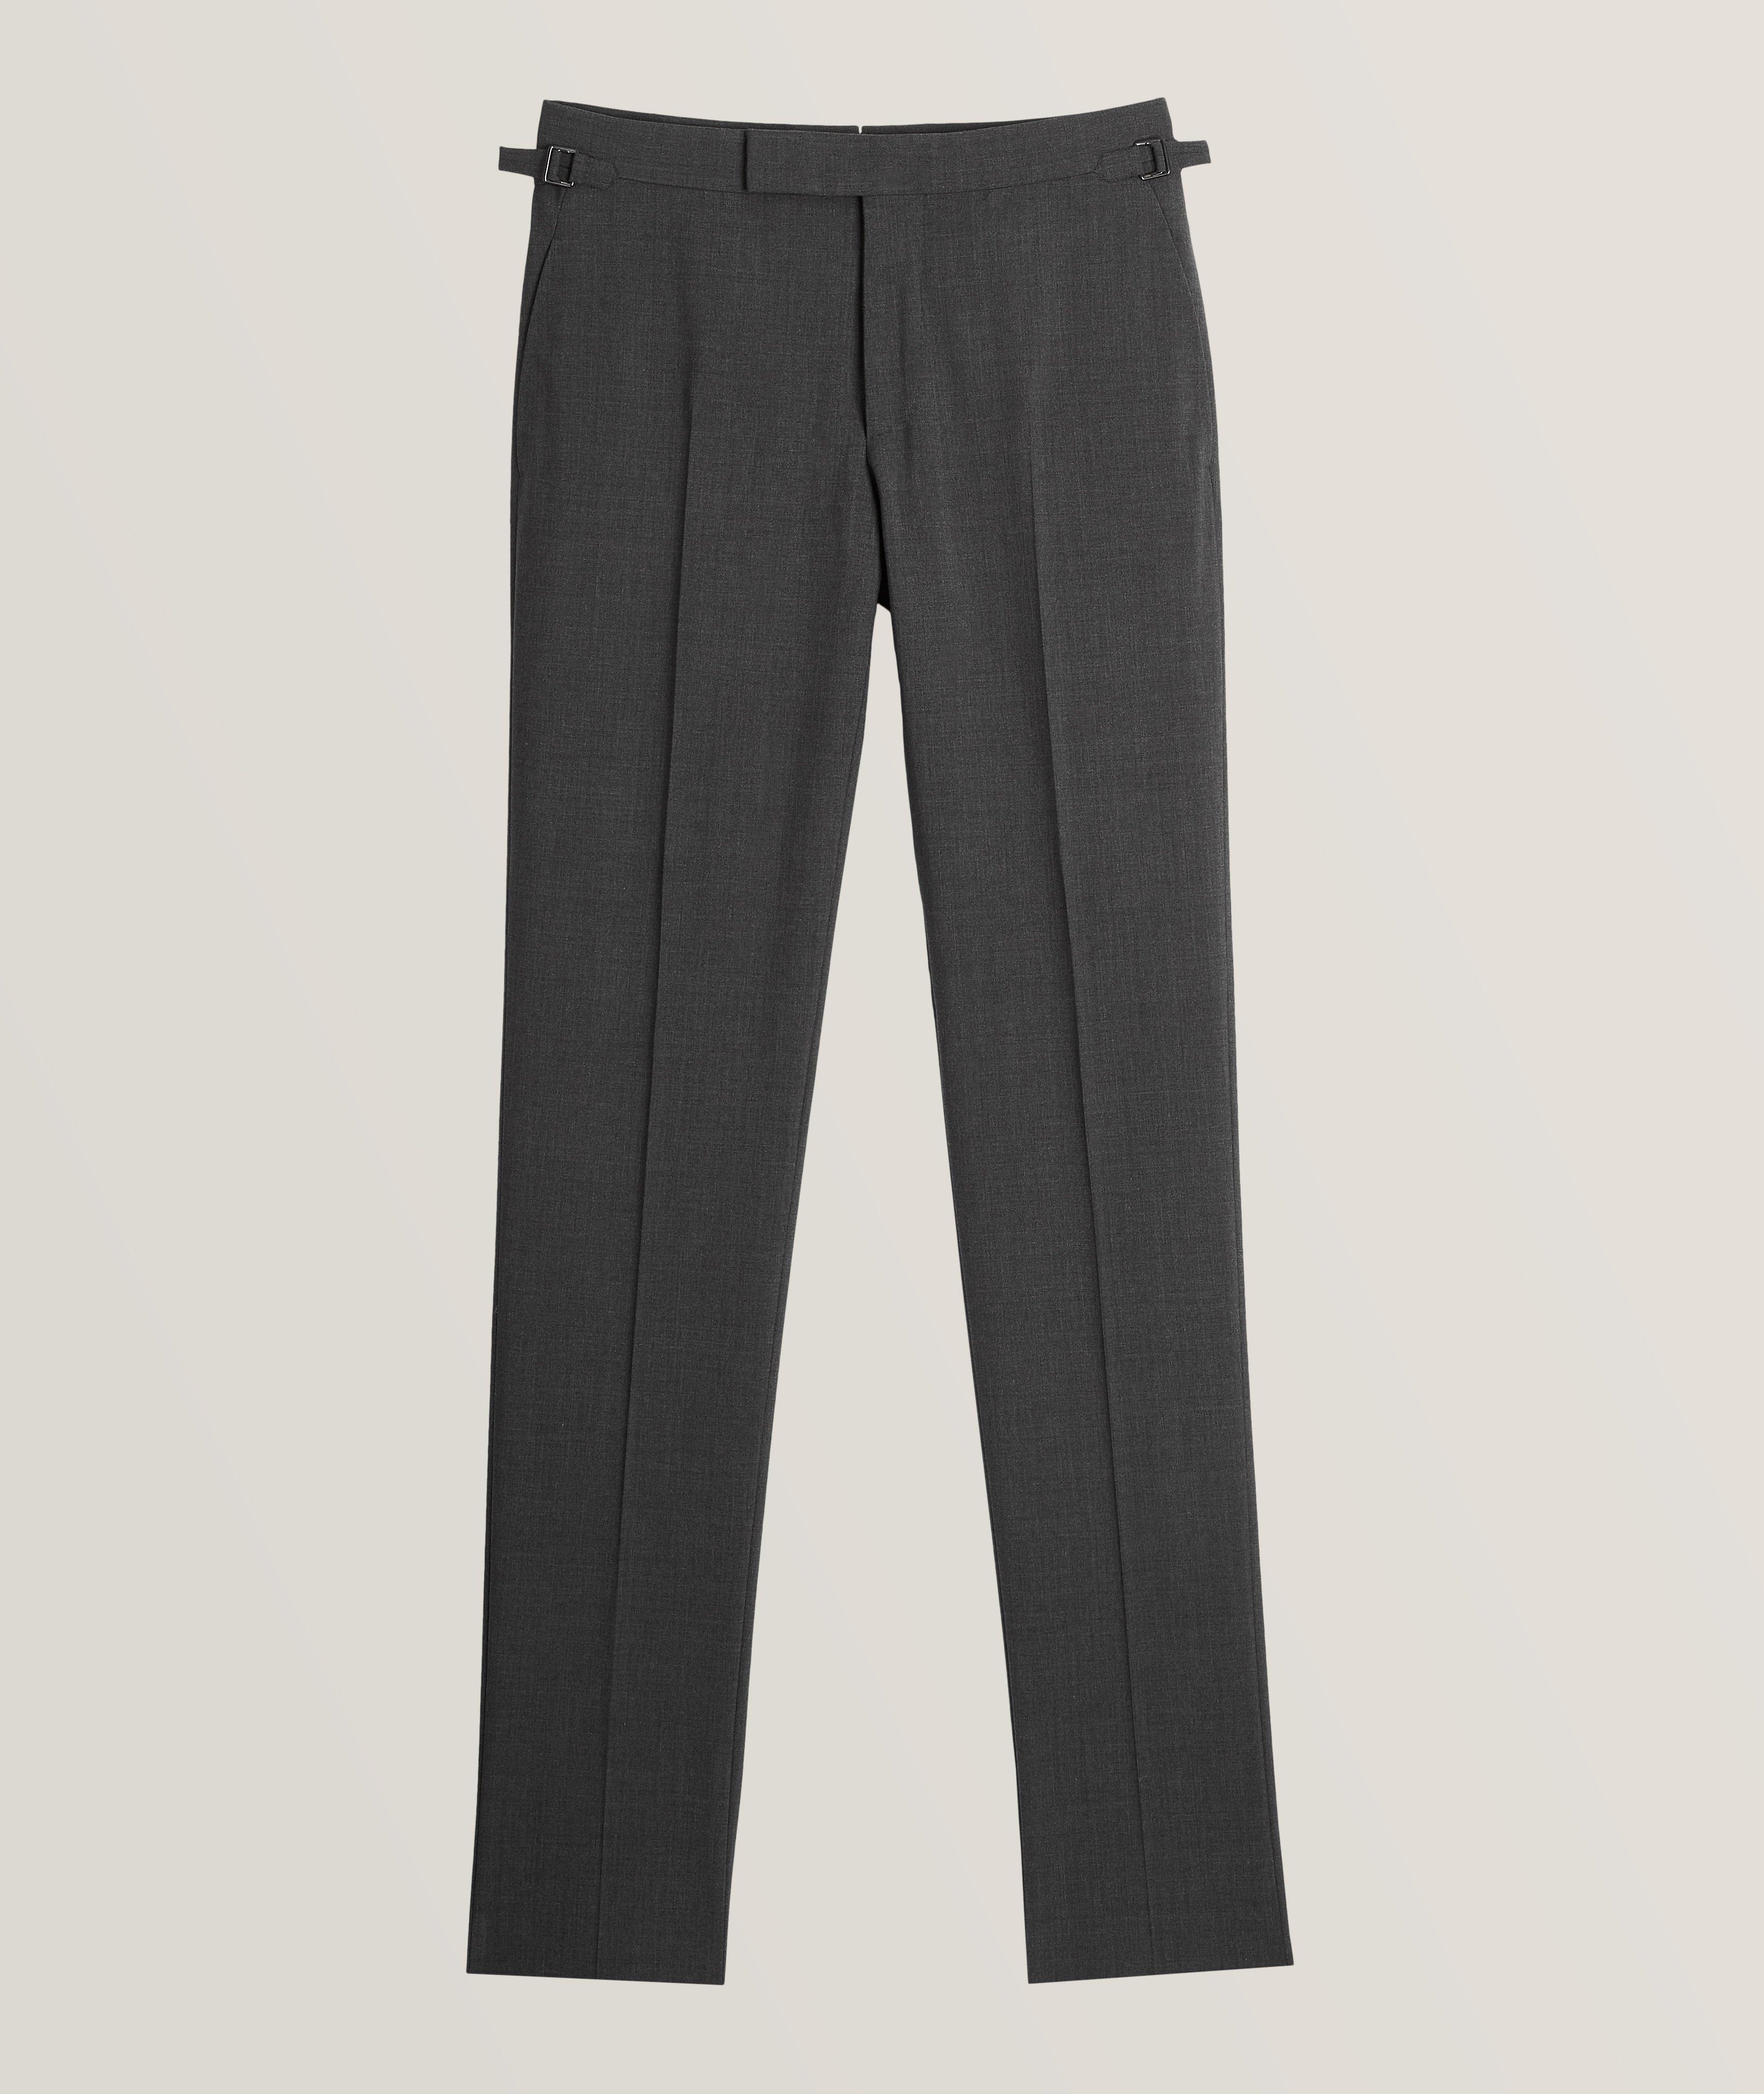 O'Connor Stretch-Wool Dress Pants image 0